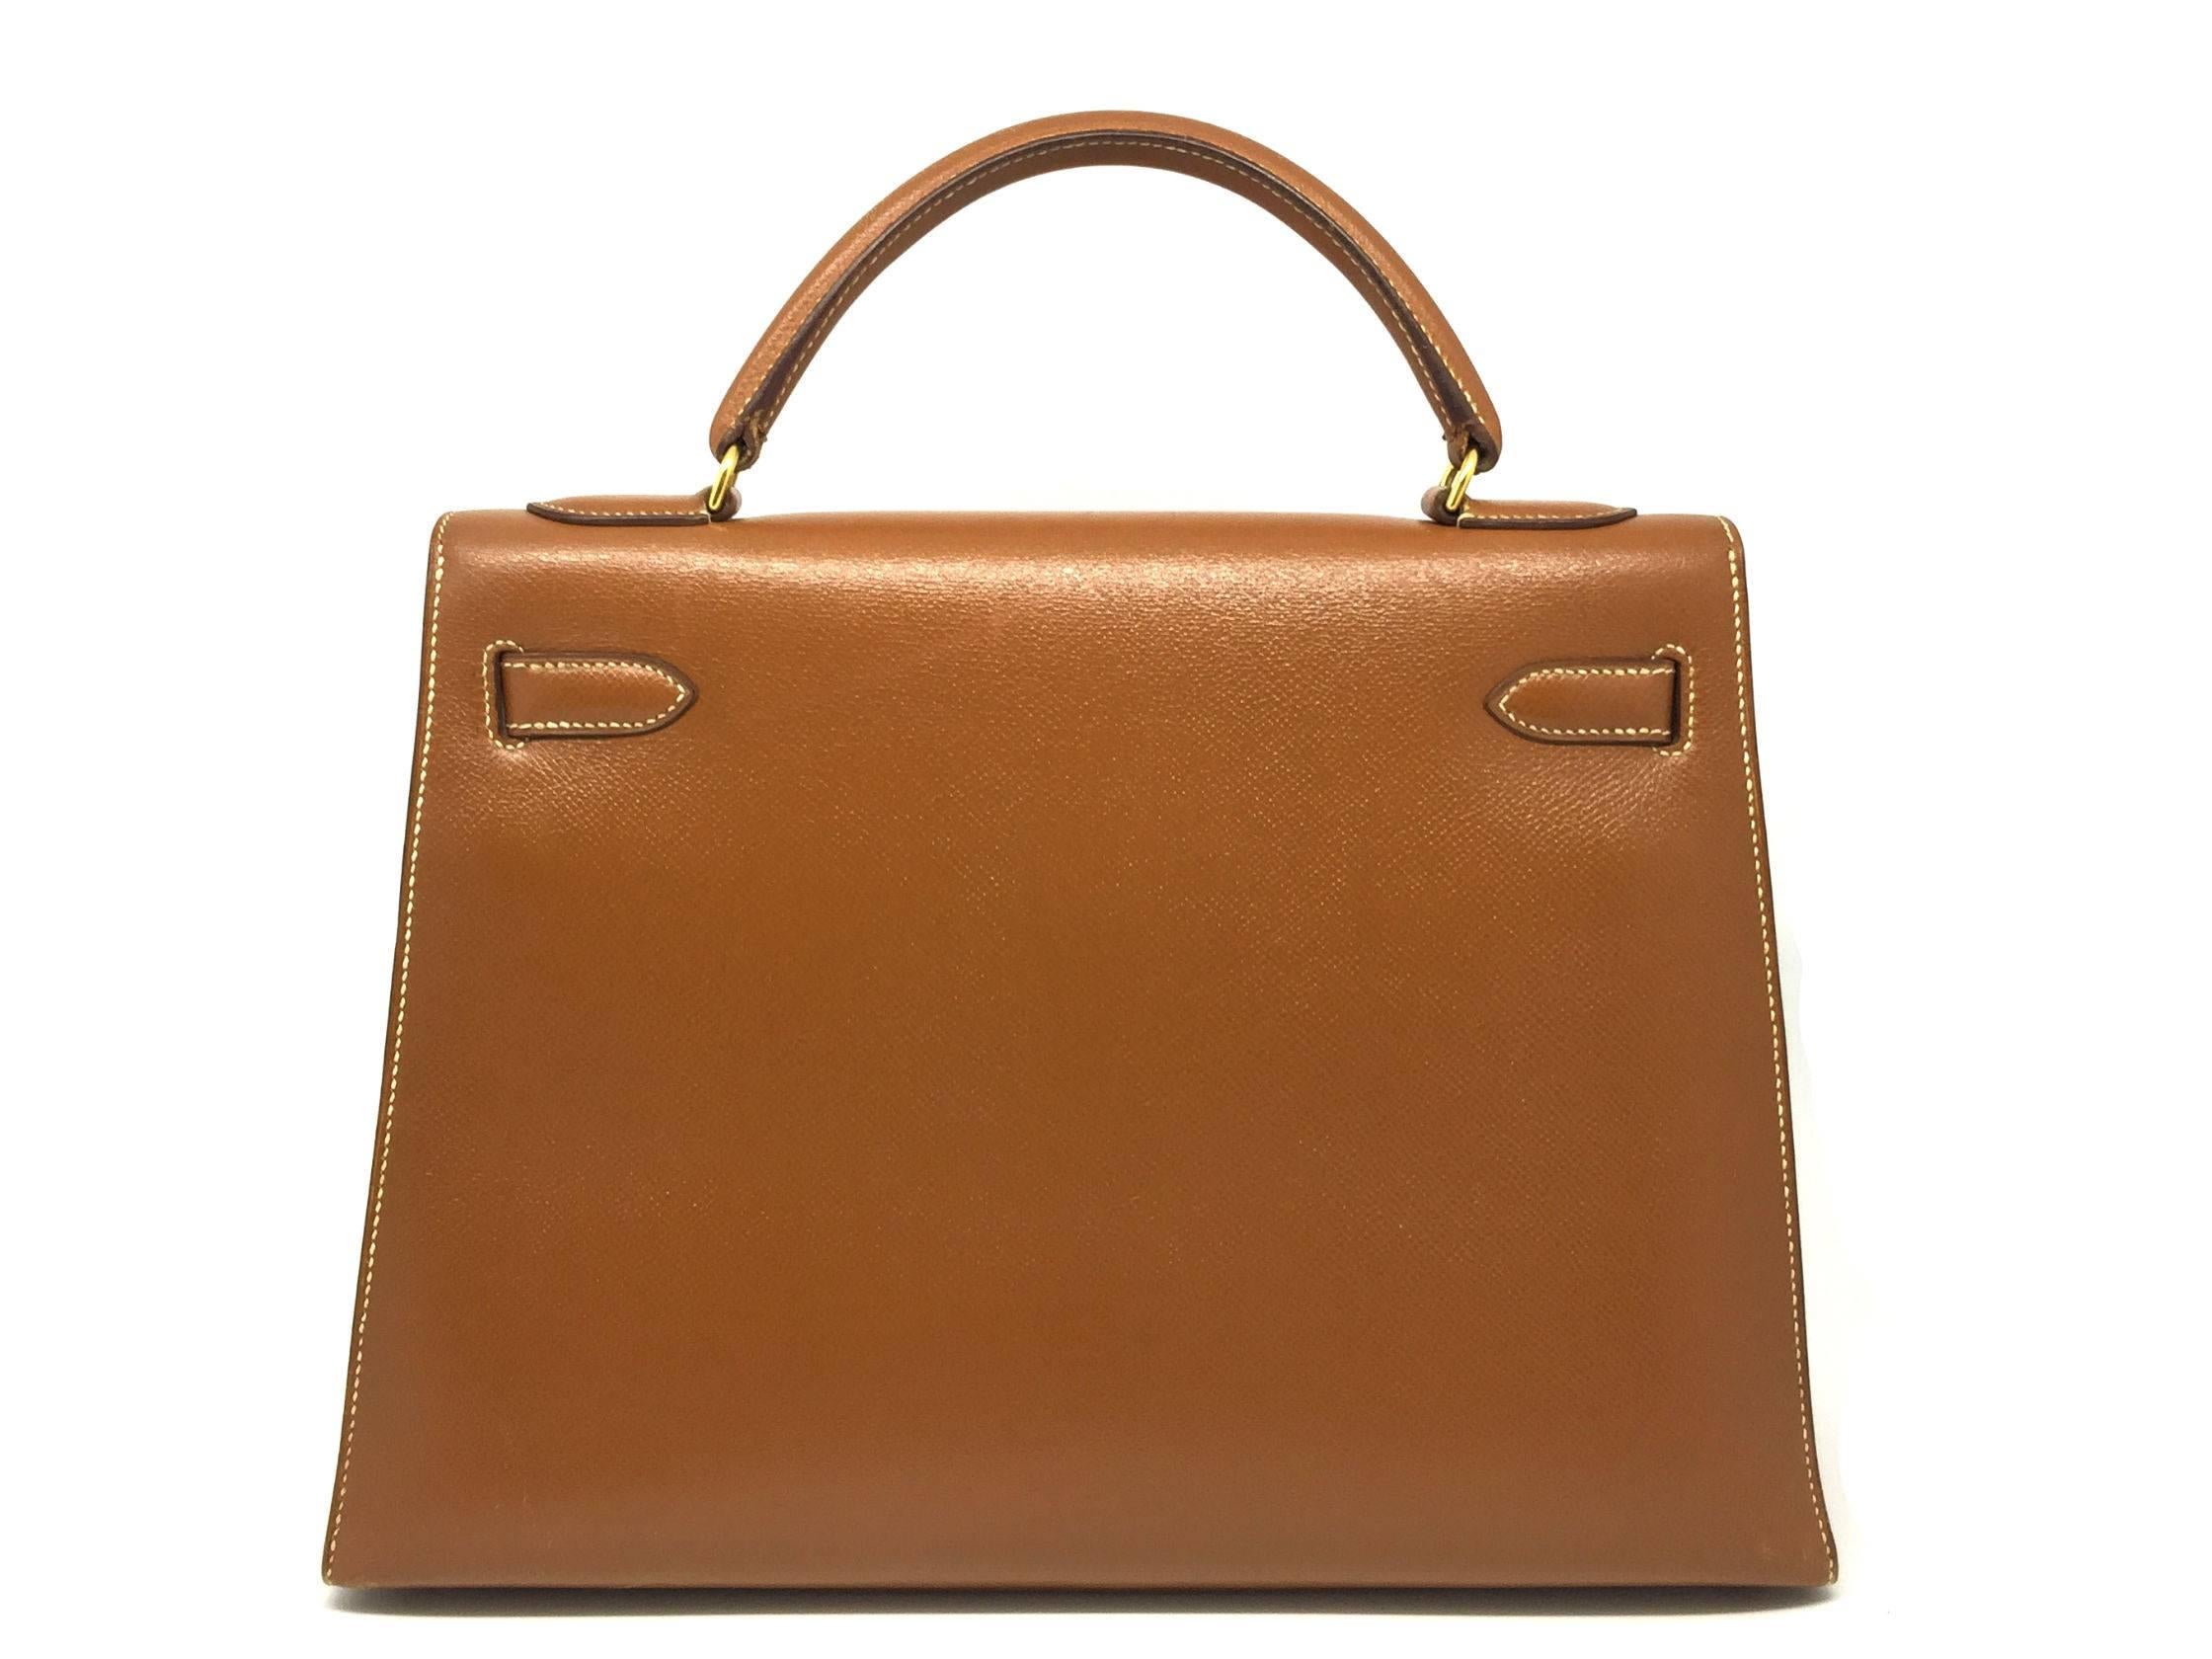 Hermes Kelly 32 Brown Cigare Epsom Leather GHW Top Handle Bag In Good Condition For Sale In Kowloon, HK